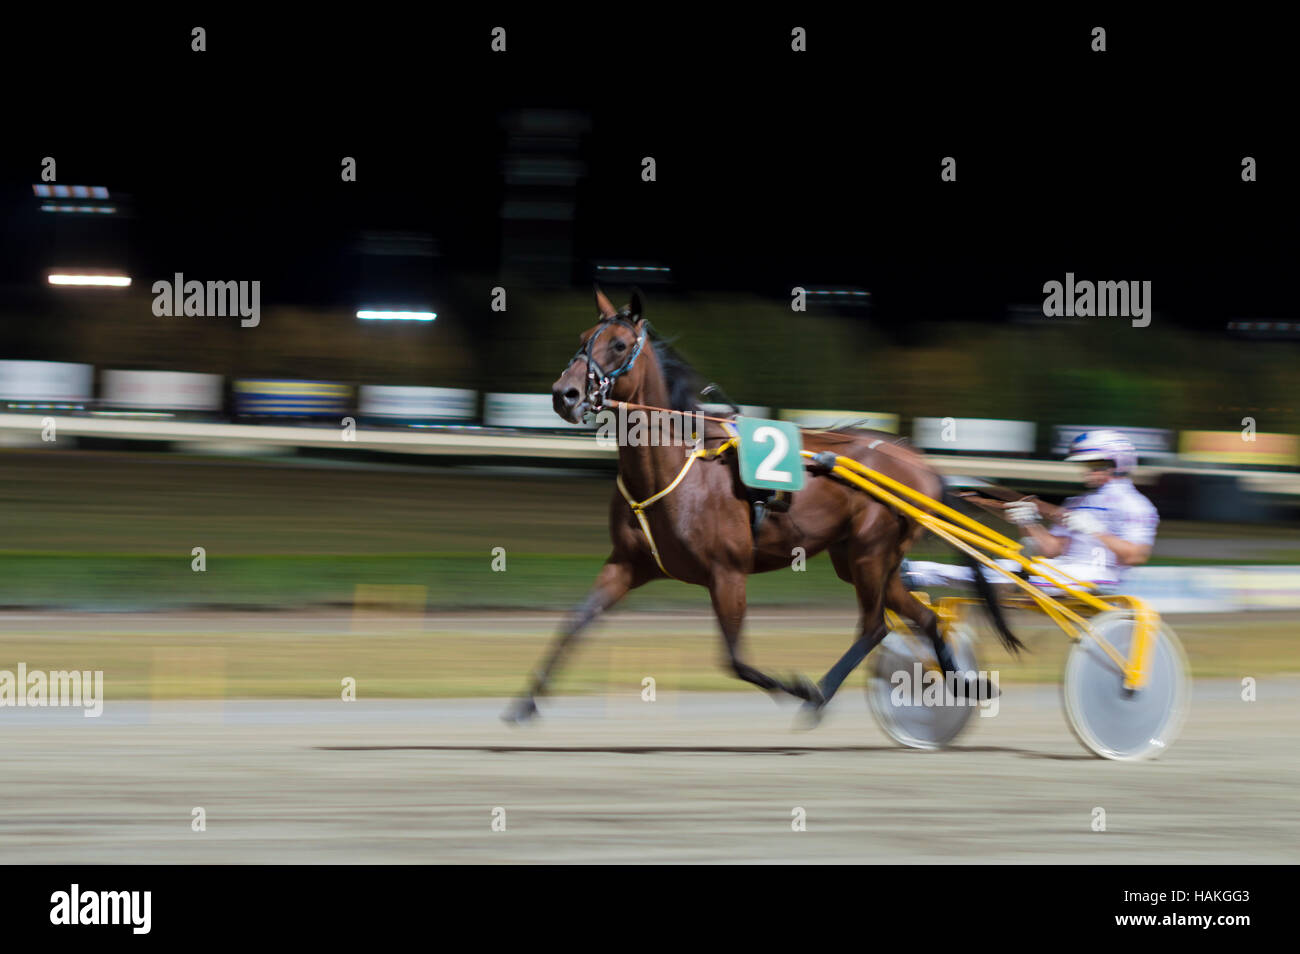 Panning effect - blurred picture night horse race background Stock Photo